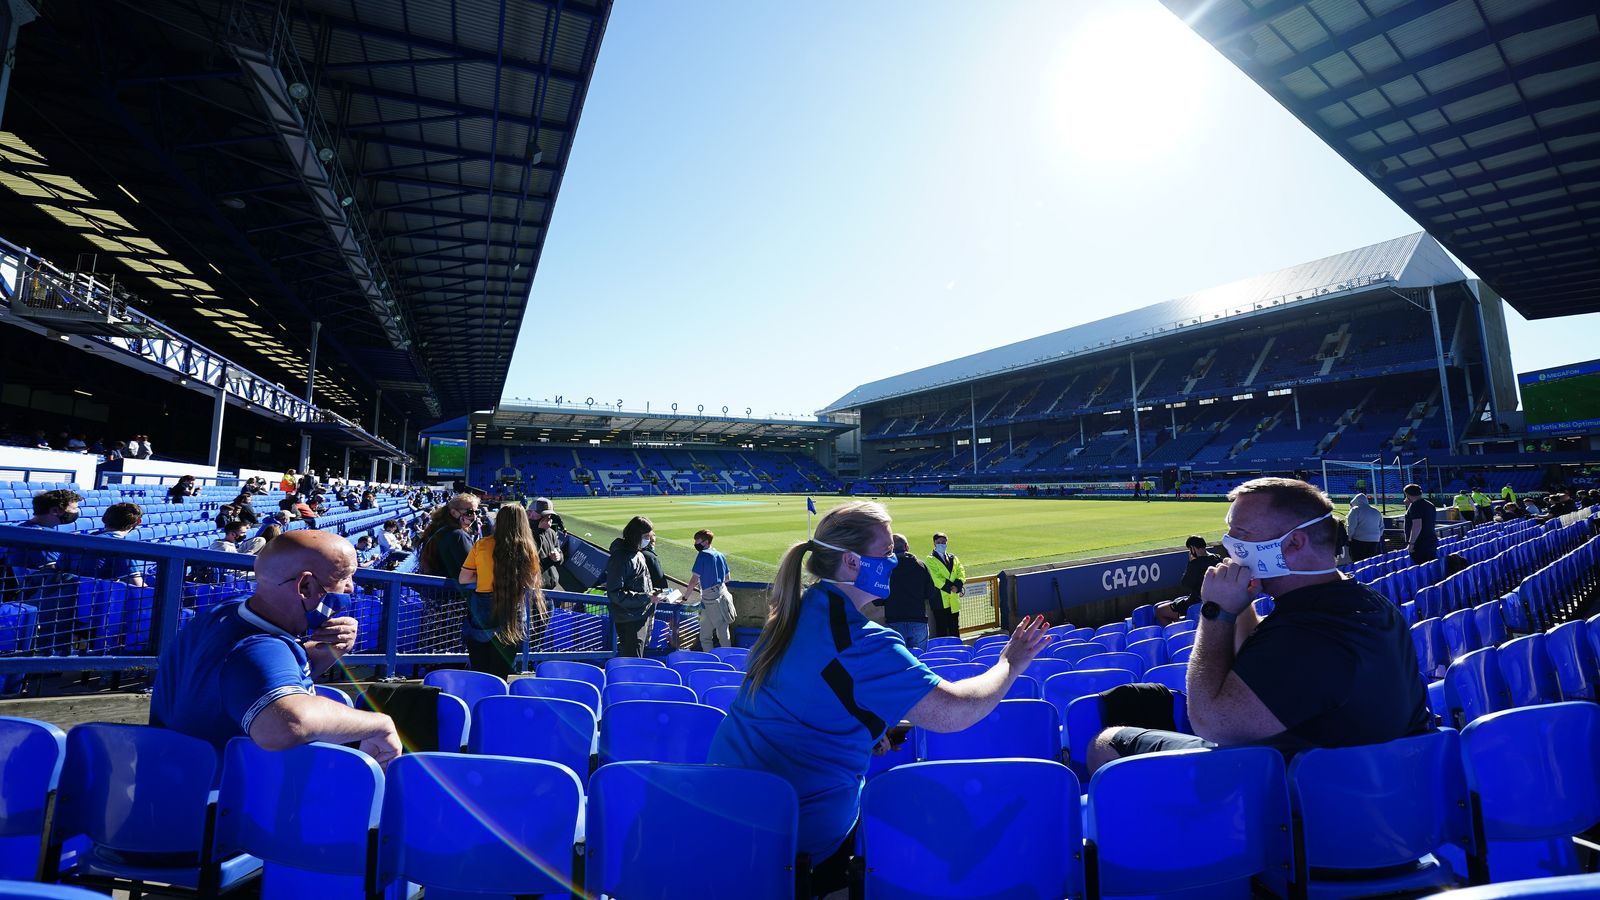 “It has been a year like no other and a season lost to fans. A season in which the joy and camaraderie of matchday has been replaced by silence and empty seats. The three games in the season where we were able to welcome a limited number of supporters into Goodison Park were very special – and somewhat emotional. Like all Evertonians, I am counting down the days for the return of fans in substantial numbers.